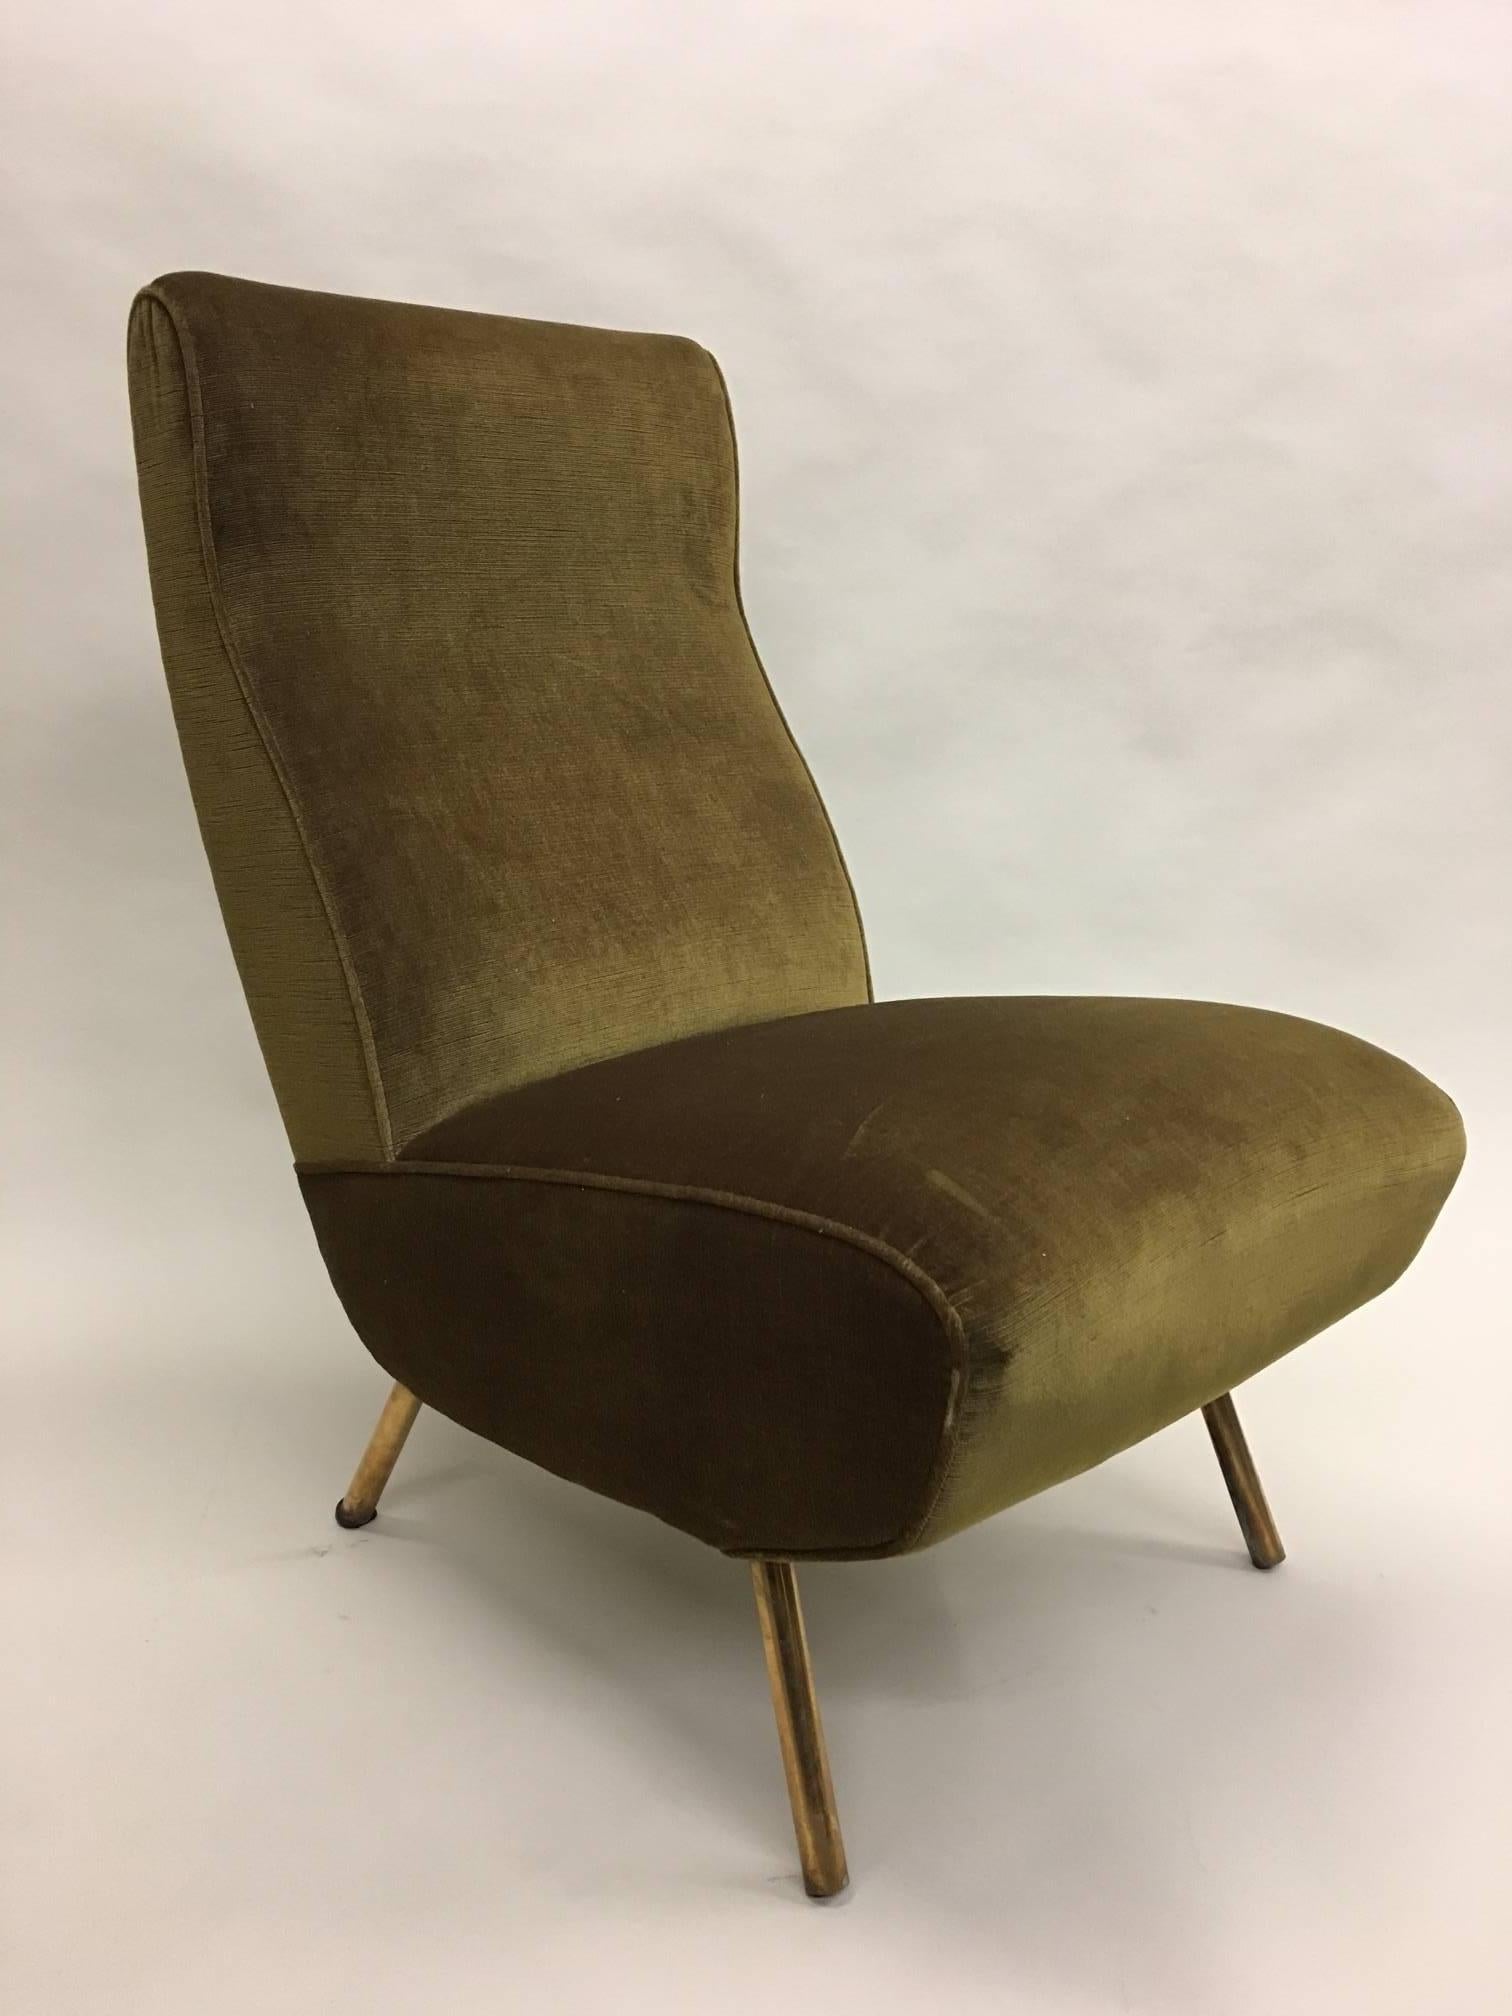 A rare and important pair of Italian Mid-Century Modern Triennale charis by Marco Zanuso circa 1951. Zanuso designed these Triennale lounge chairs in conjunction with the Triennale sofa for an international exhibition in 1951; however very few were